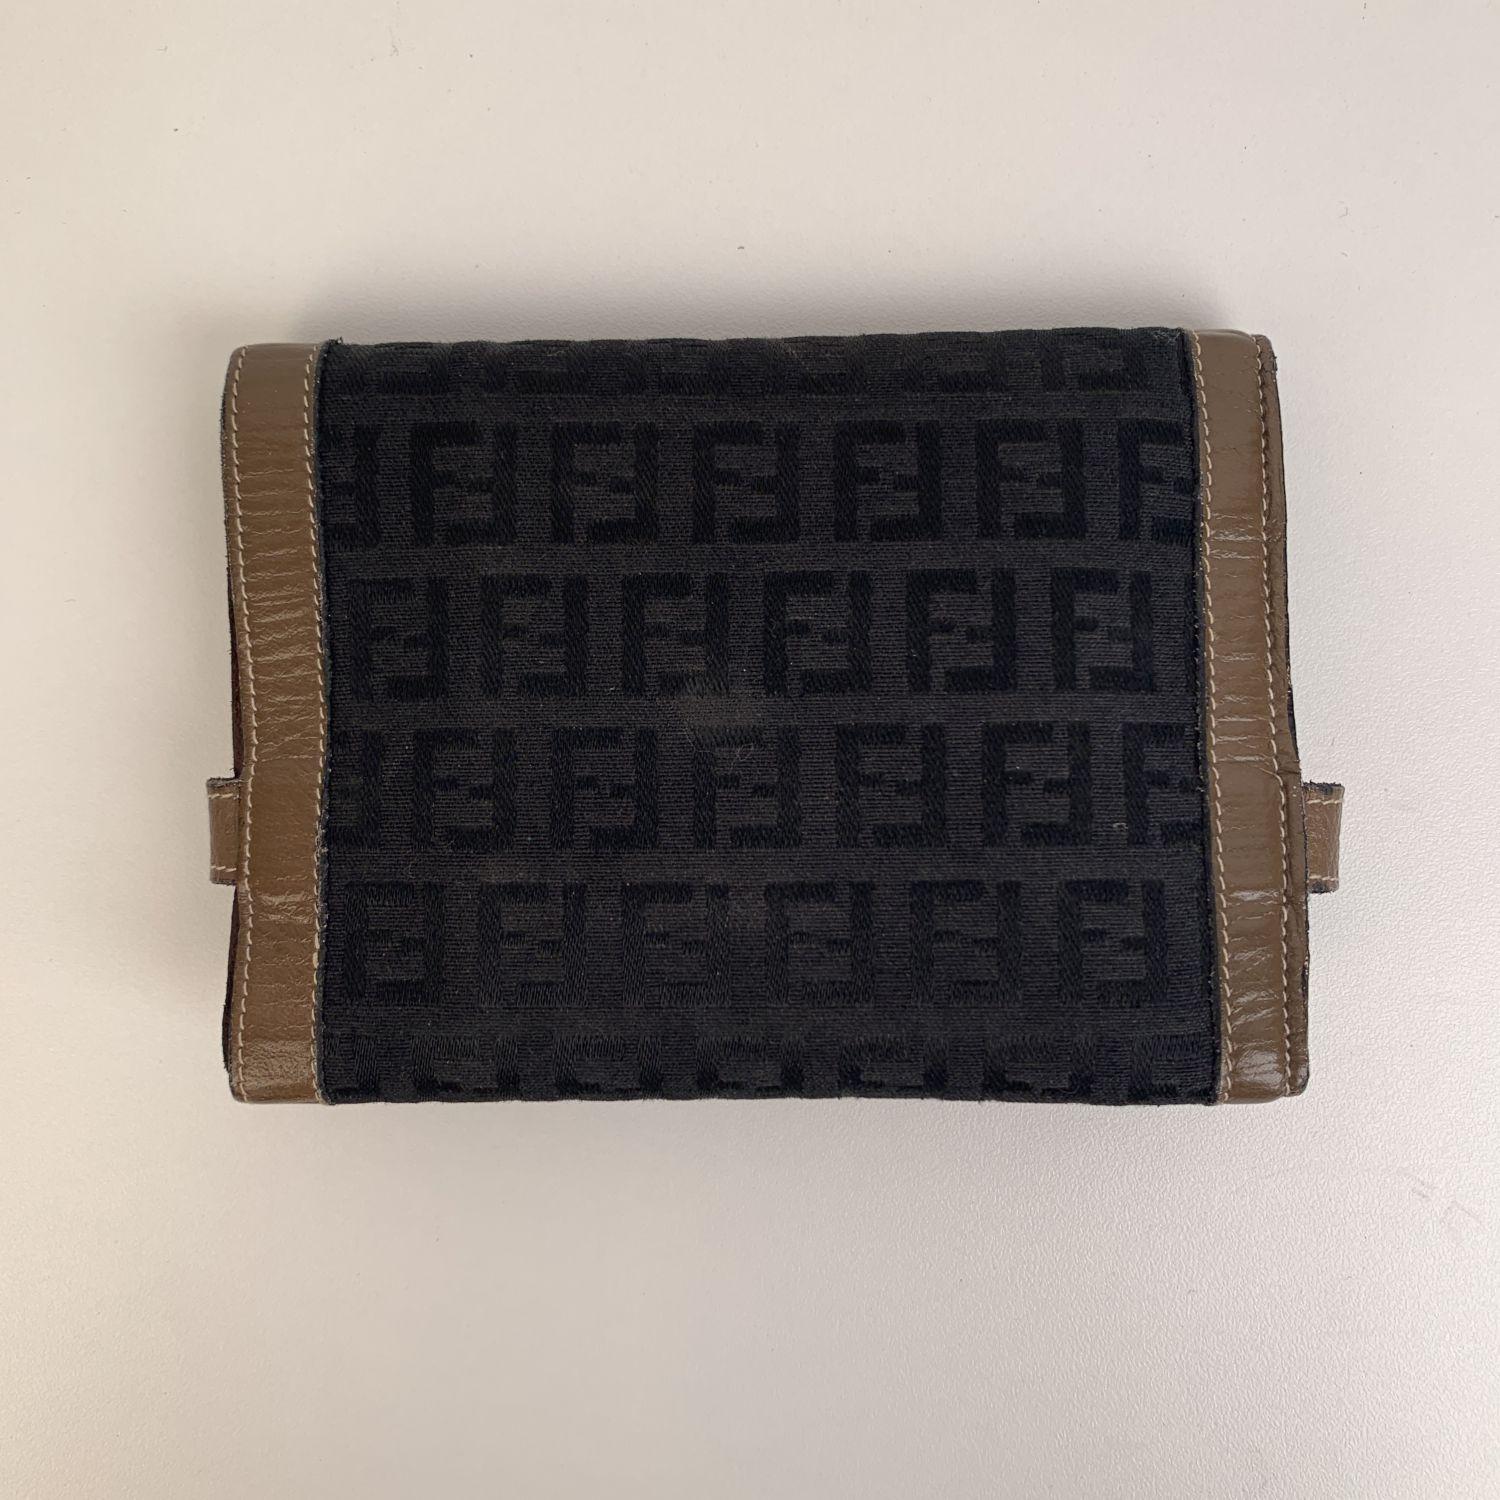 FENDI vintage canvas and leather wallet with FF - FENDI monogram pattern. Bicolor design. Strap Closure and Button Closure. Internal sections: 1 Bill Compartment, 2 Credit Card Slots, 2 Compartment and 1 Coin Purse. Logos / Tags: FENDI Monograms